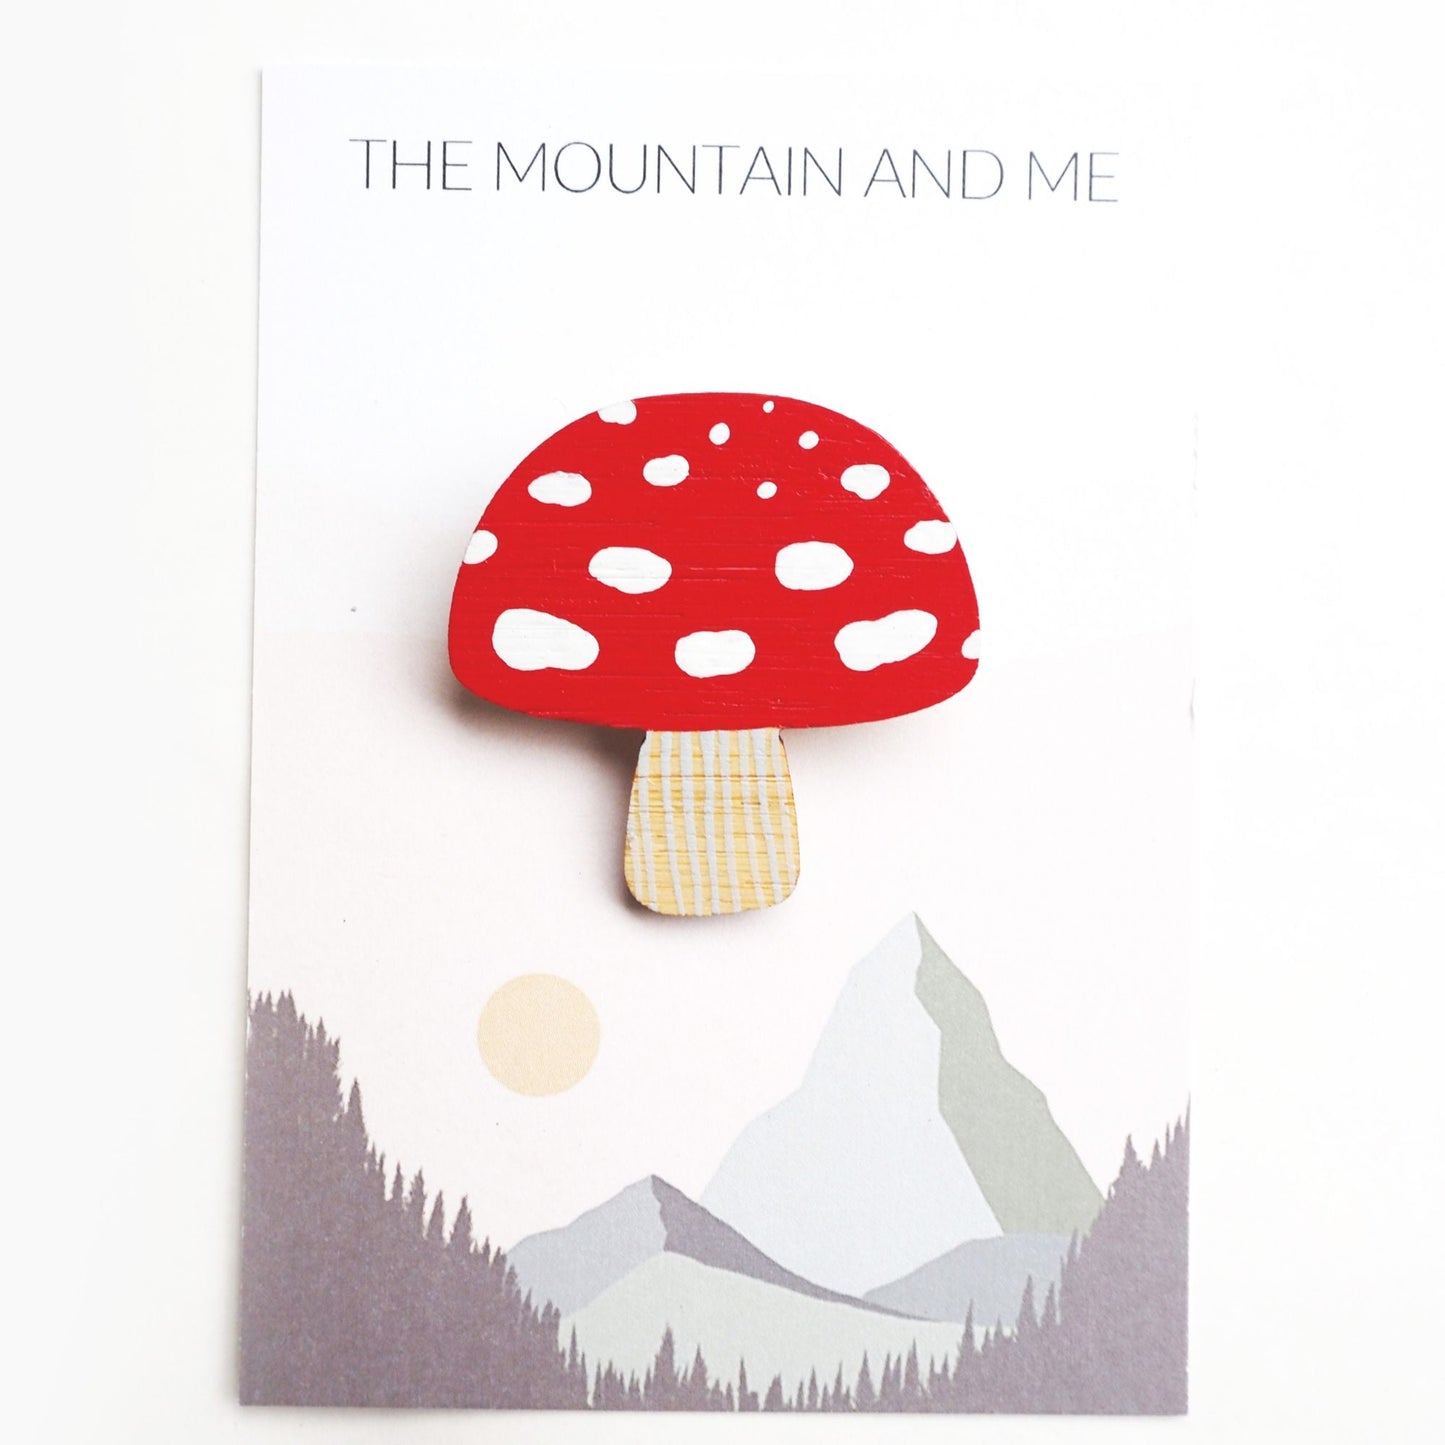 Load image into Gallery viewer, Toadstool brooch on the mountain and Me branded backing card and white backdrop.
